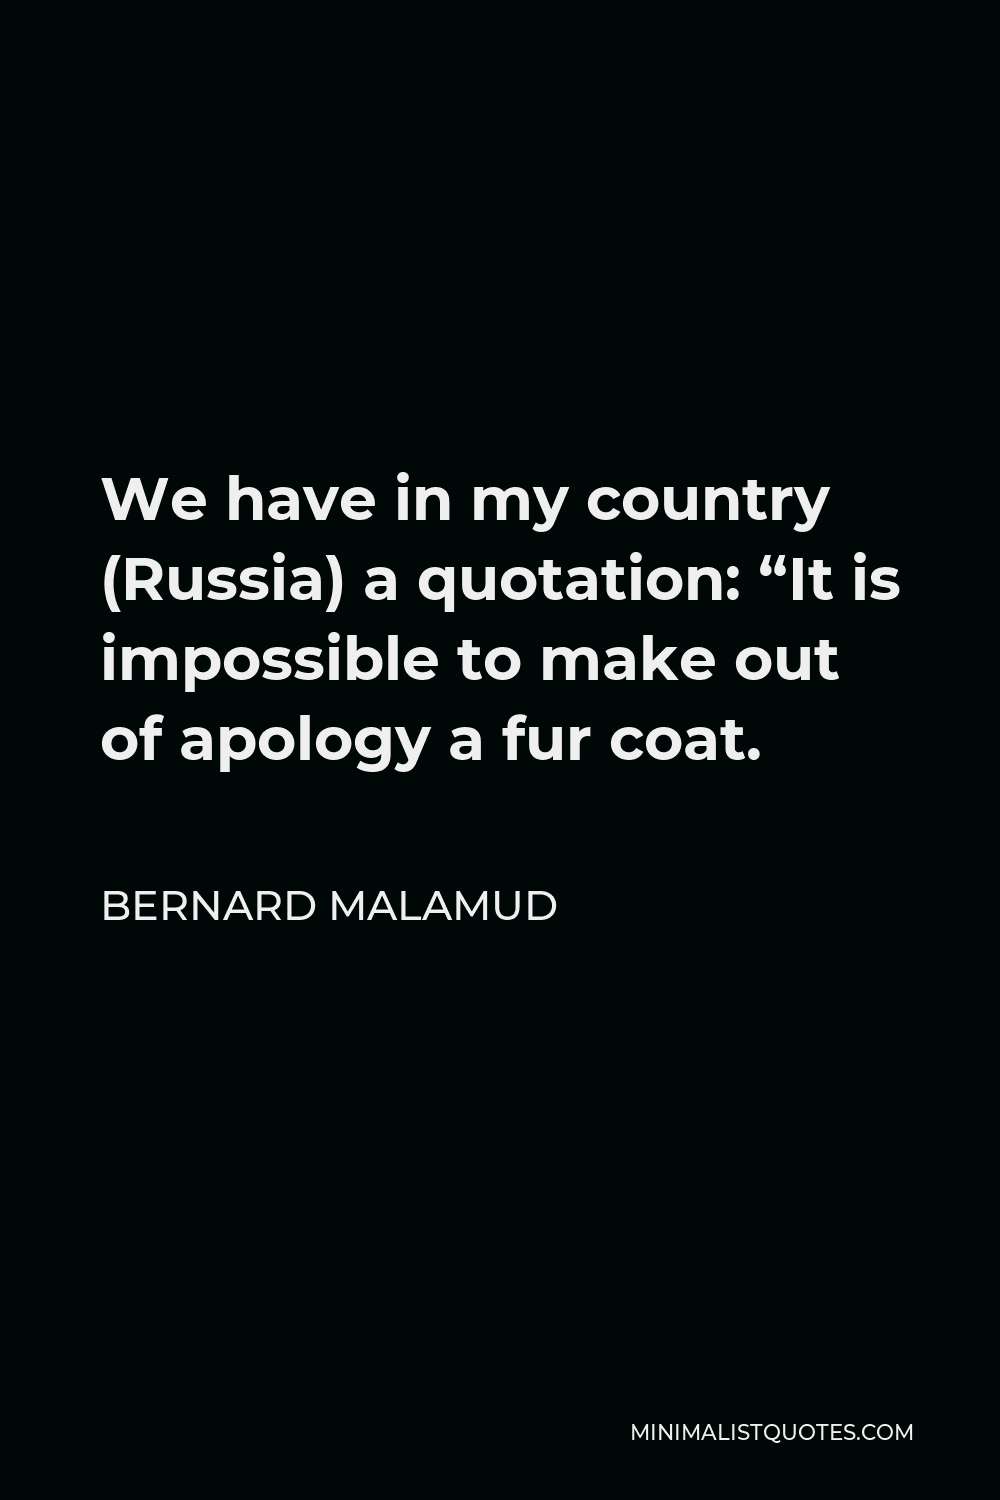 Bernard Malamud Quote - We have in my country (Russia) a quotation: “It is impossible to make out of apology a fur coat.